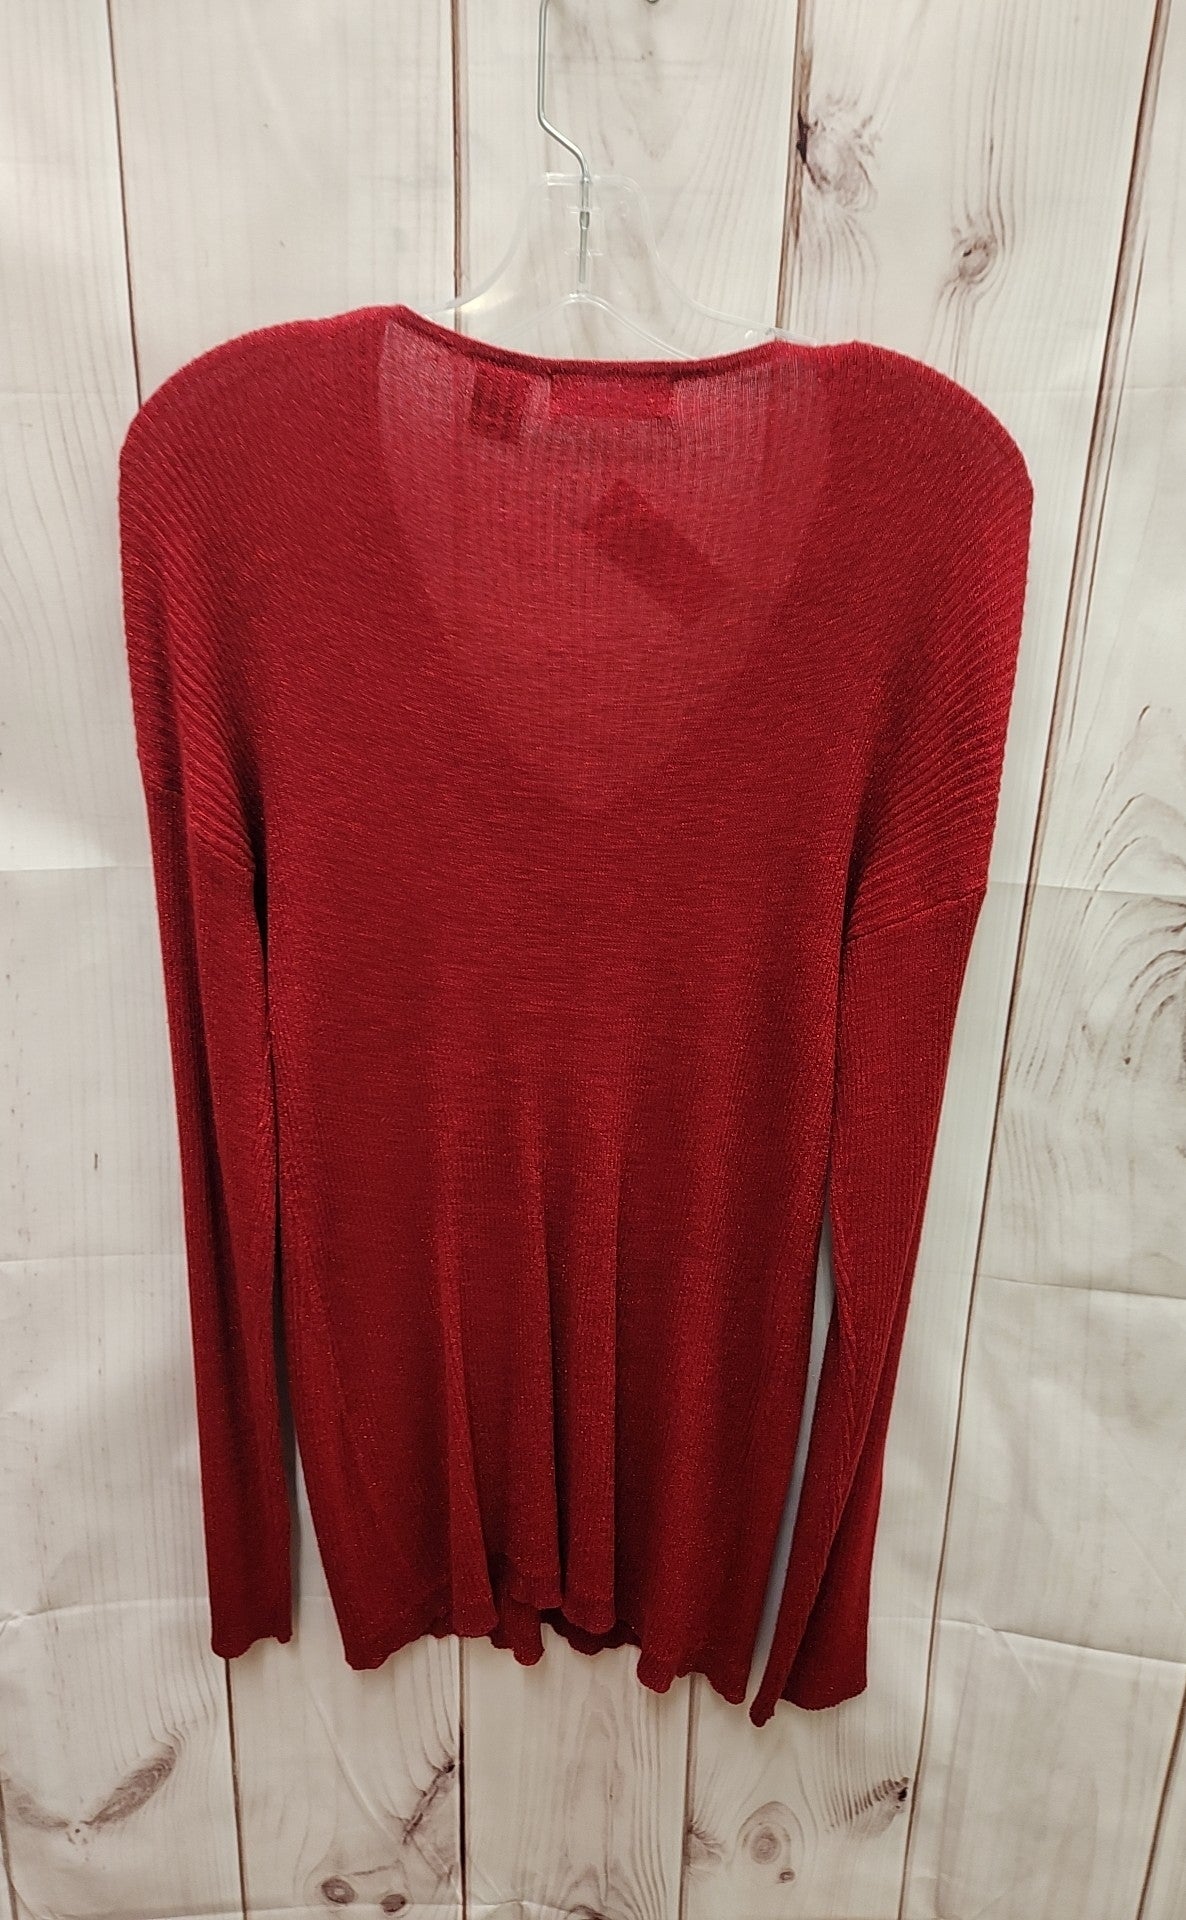 Verve Women's Size XL Red Sweater